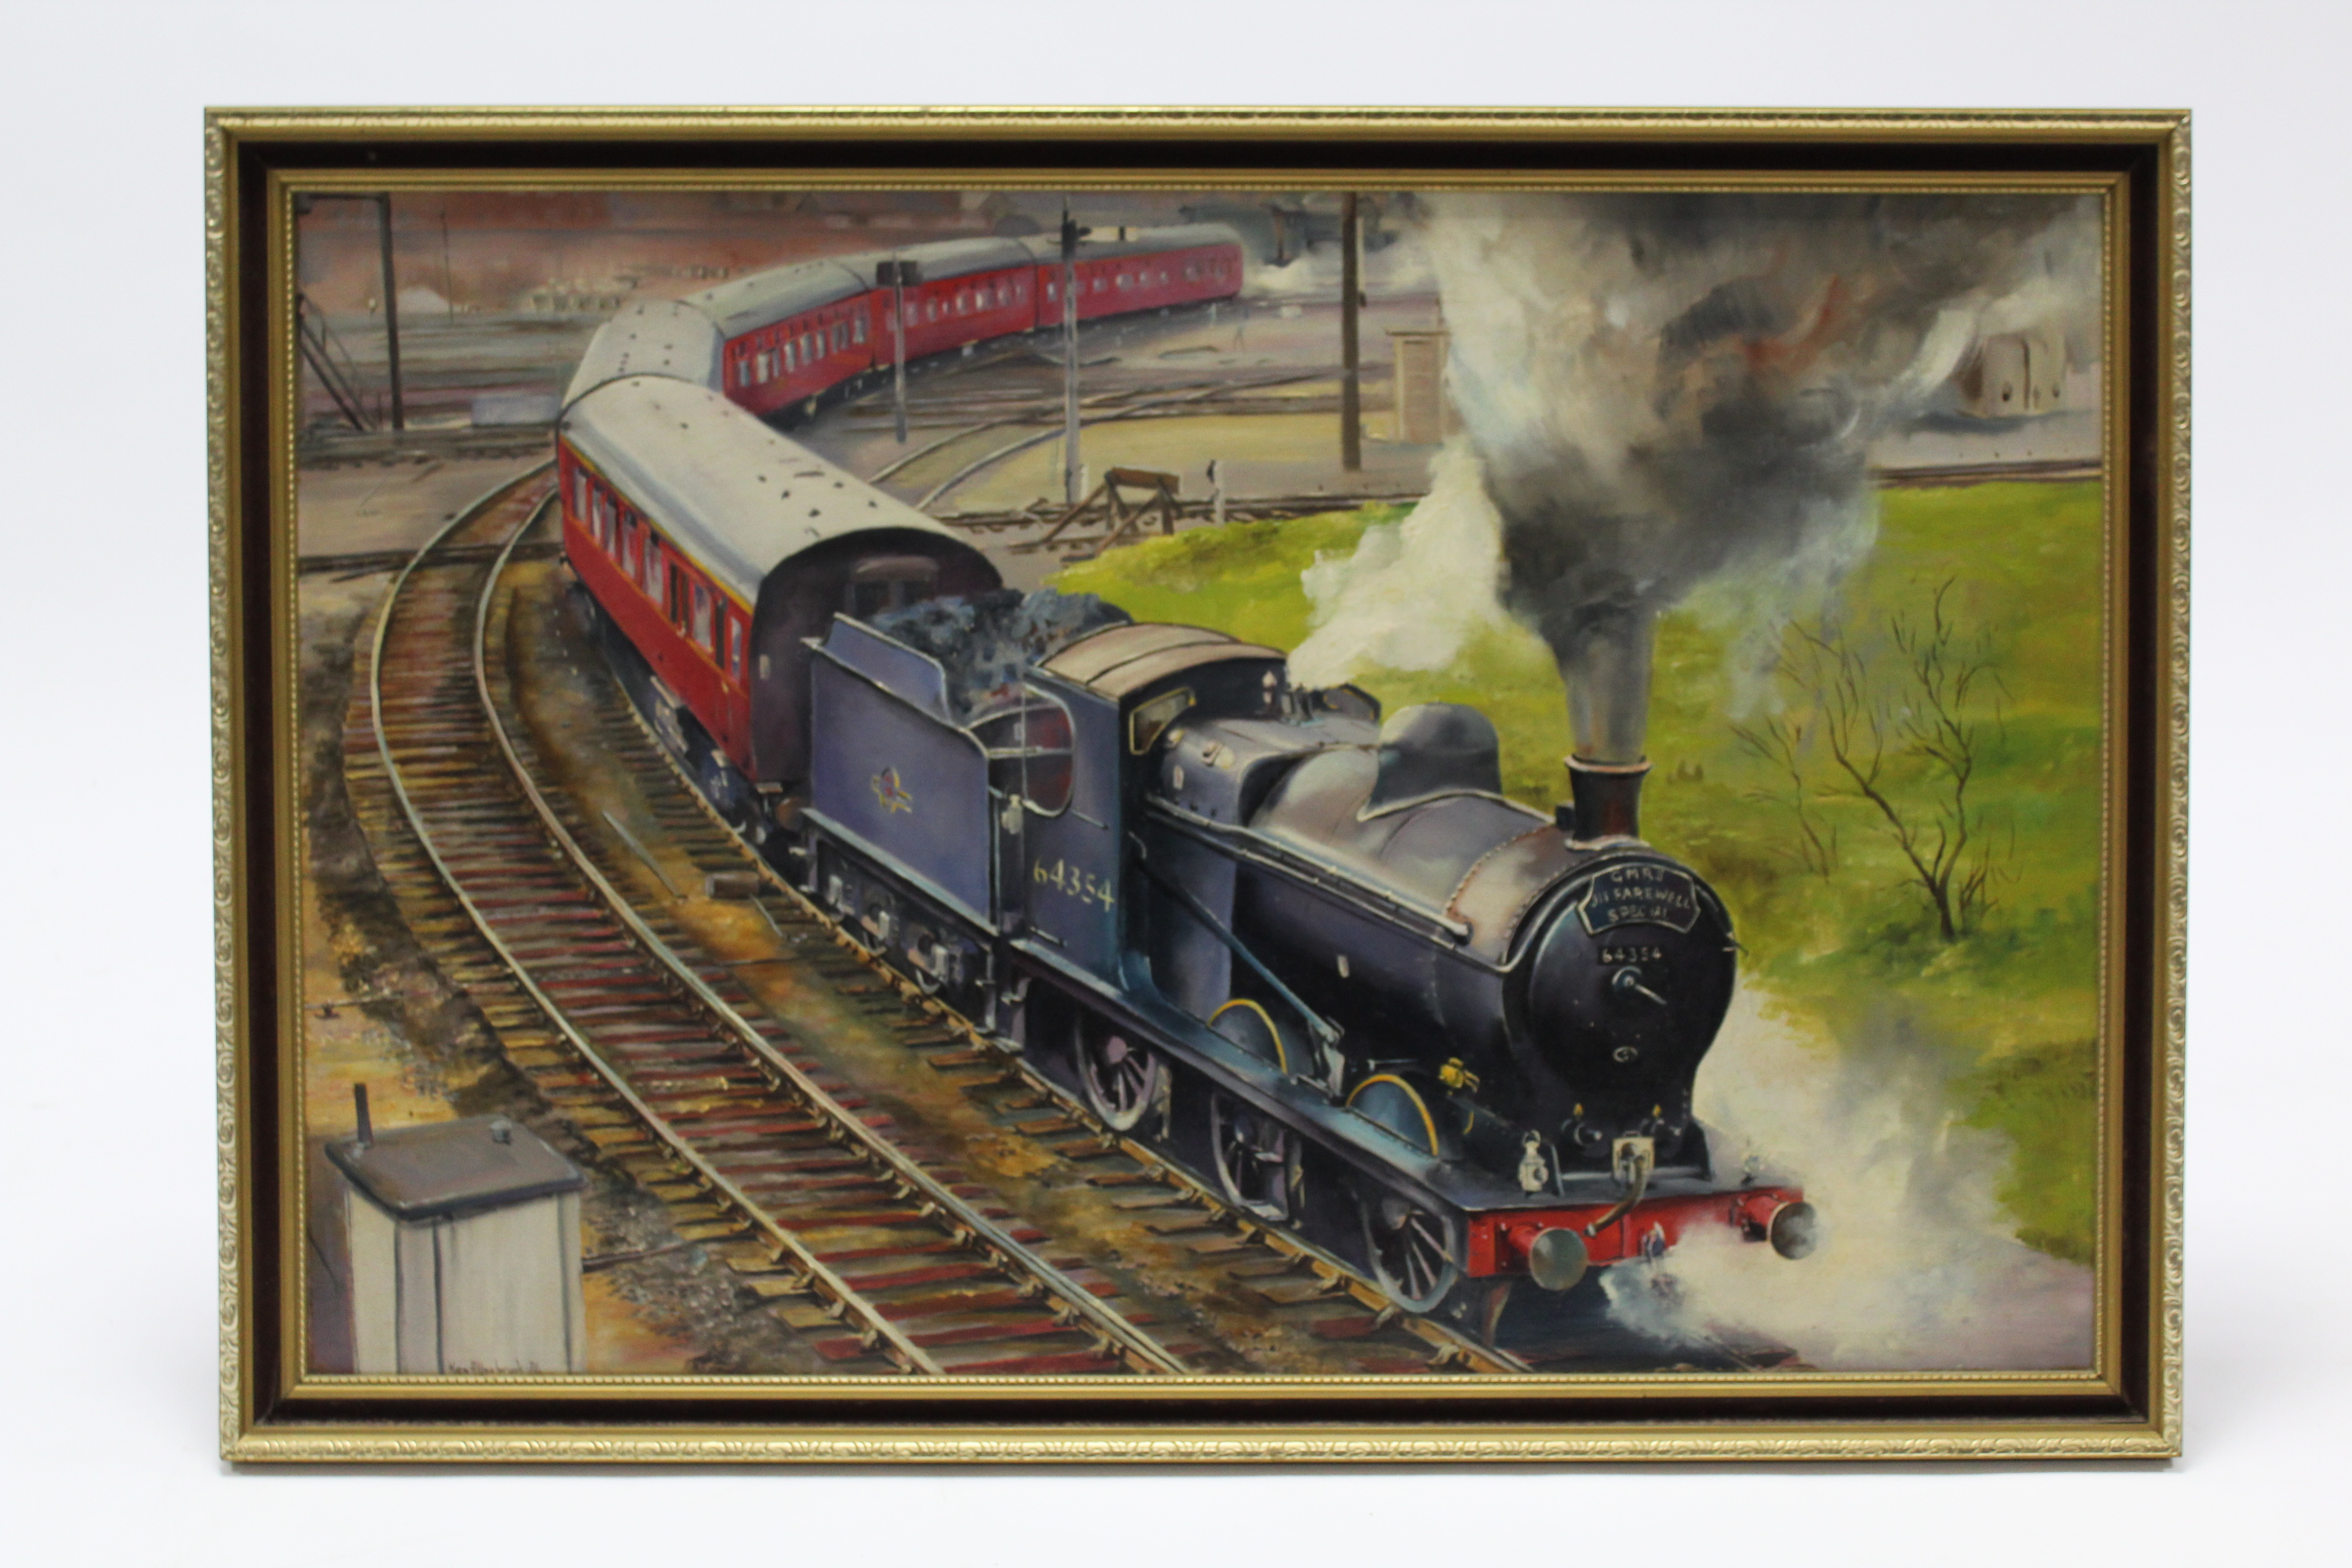 Another large oil painting on canvas by Ken Allsebrook, of a railway locomotive titled to